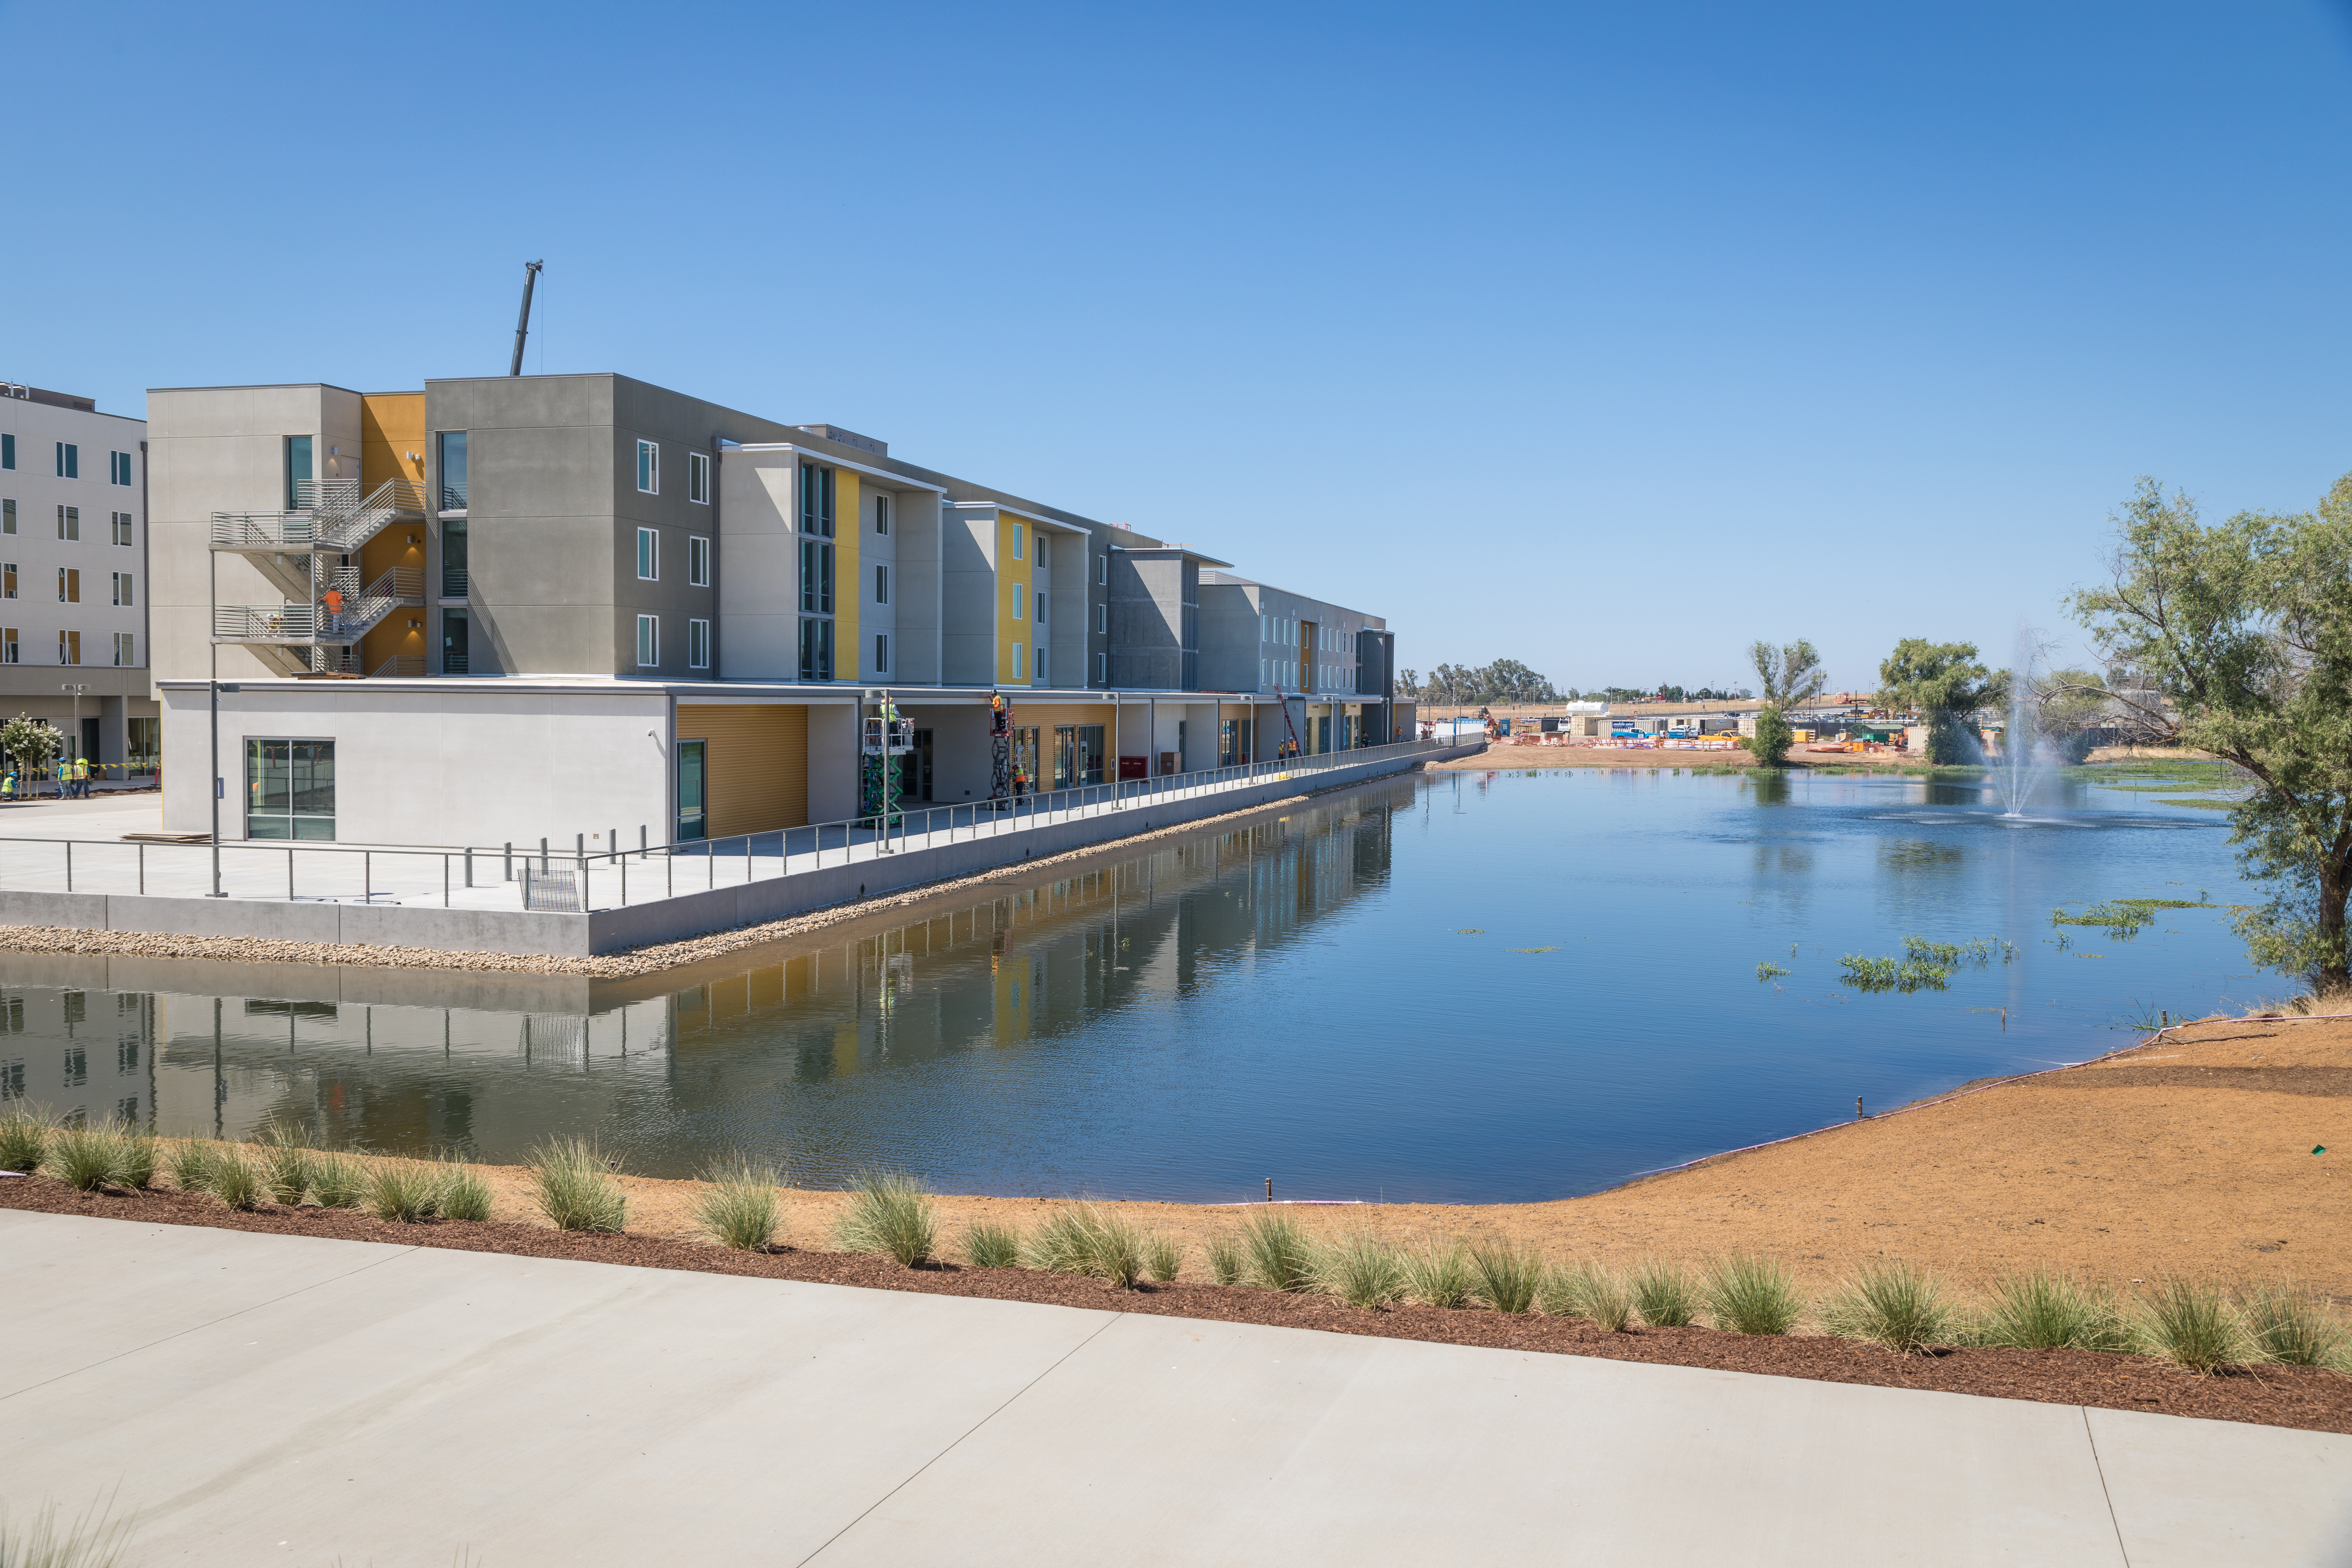 LONG-TERM PARTNERS—Building through public-private partnerships helps institutions such as University of California Merced to grow. The Merced 2020 expansion involves a 39-year agreement with a single private development team from Plentary Properties Merced. Granite Pass Residence Hall is one part of the plan; a two-phase project; its northern phase was completed in 2018 and its southern portion is scheduled for opening in 2020.